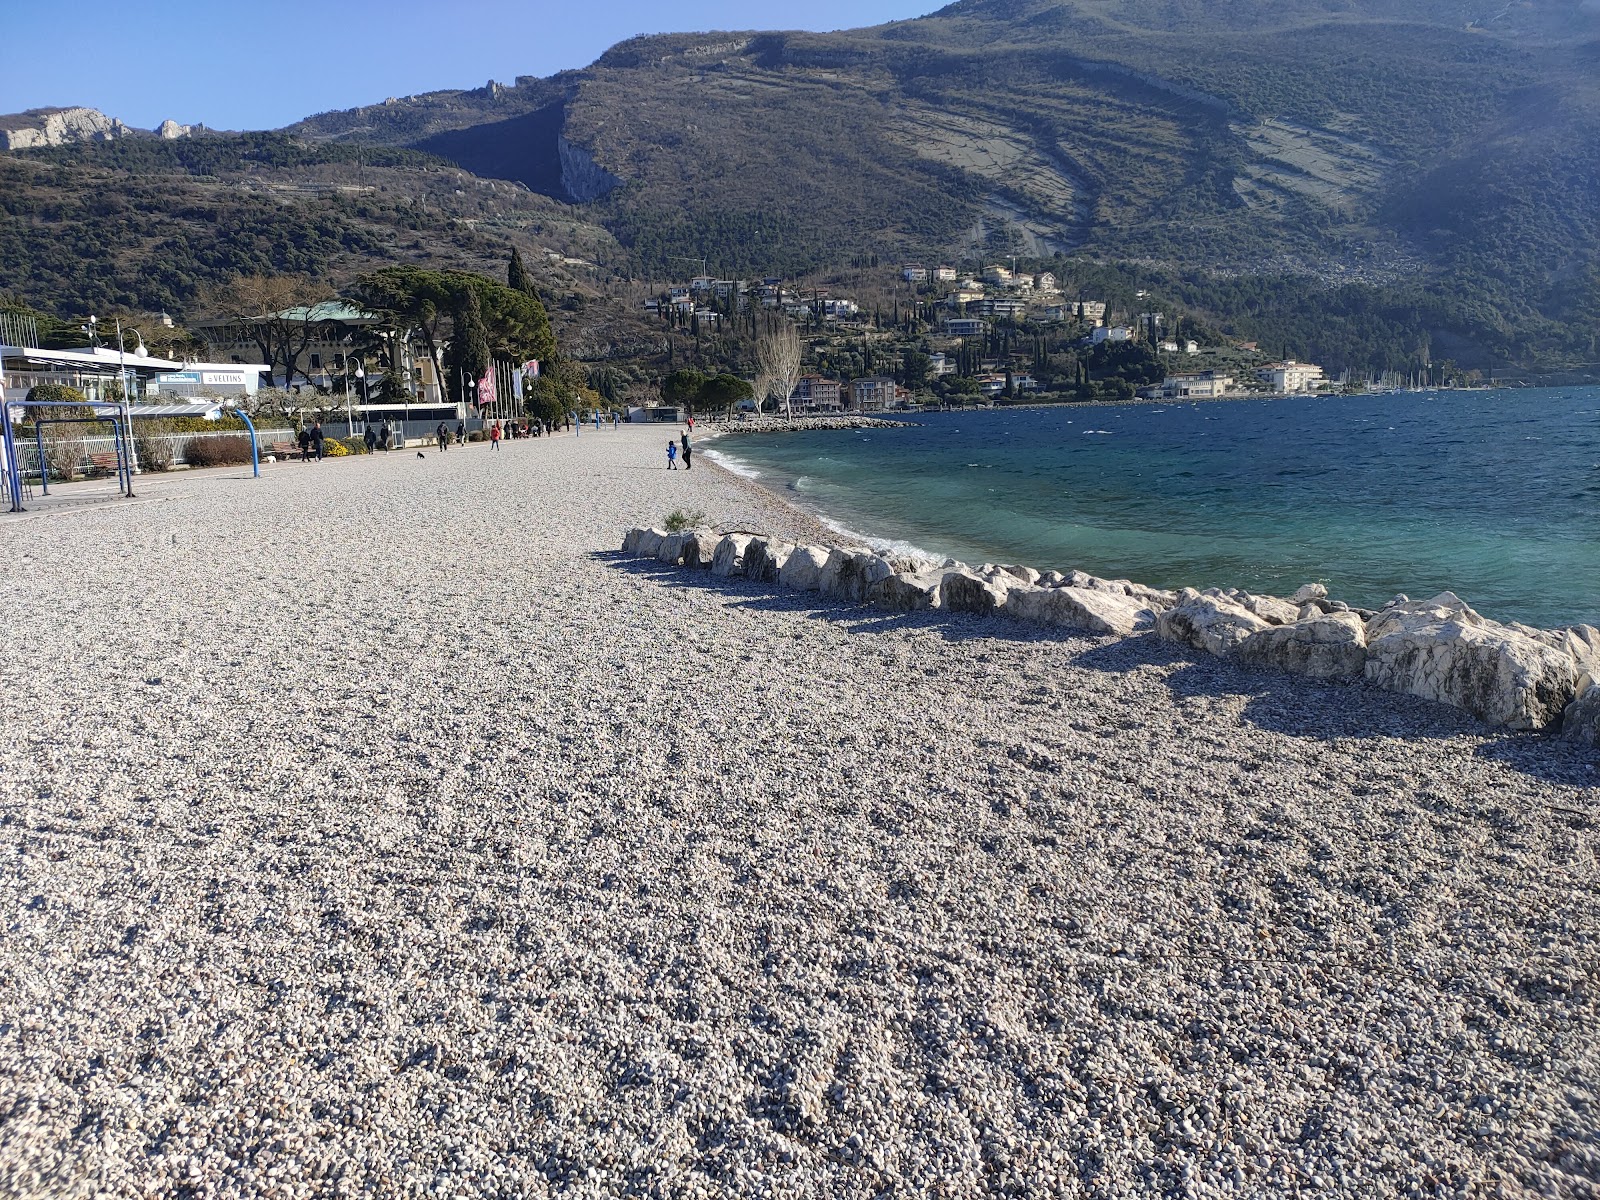 Photo of Spiaggia Lungolago and its beautiful scenery